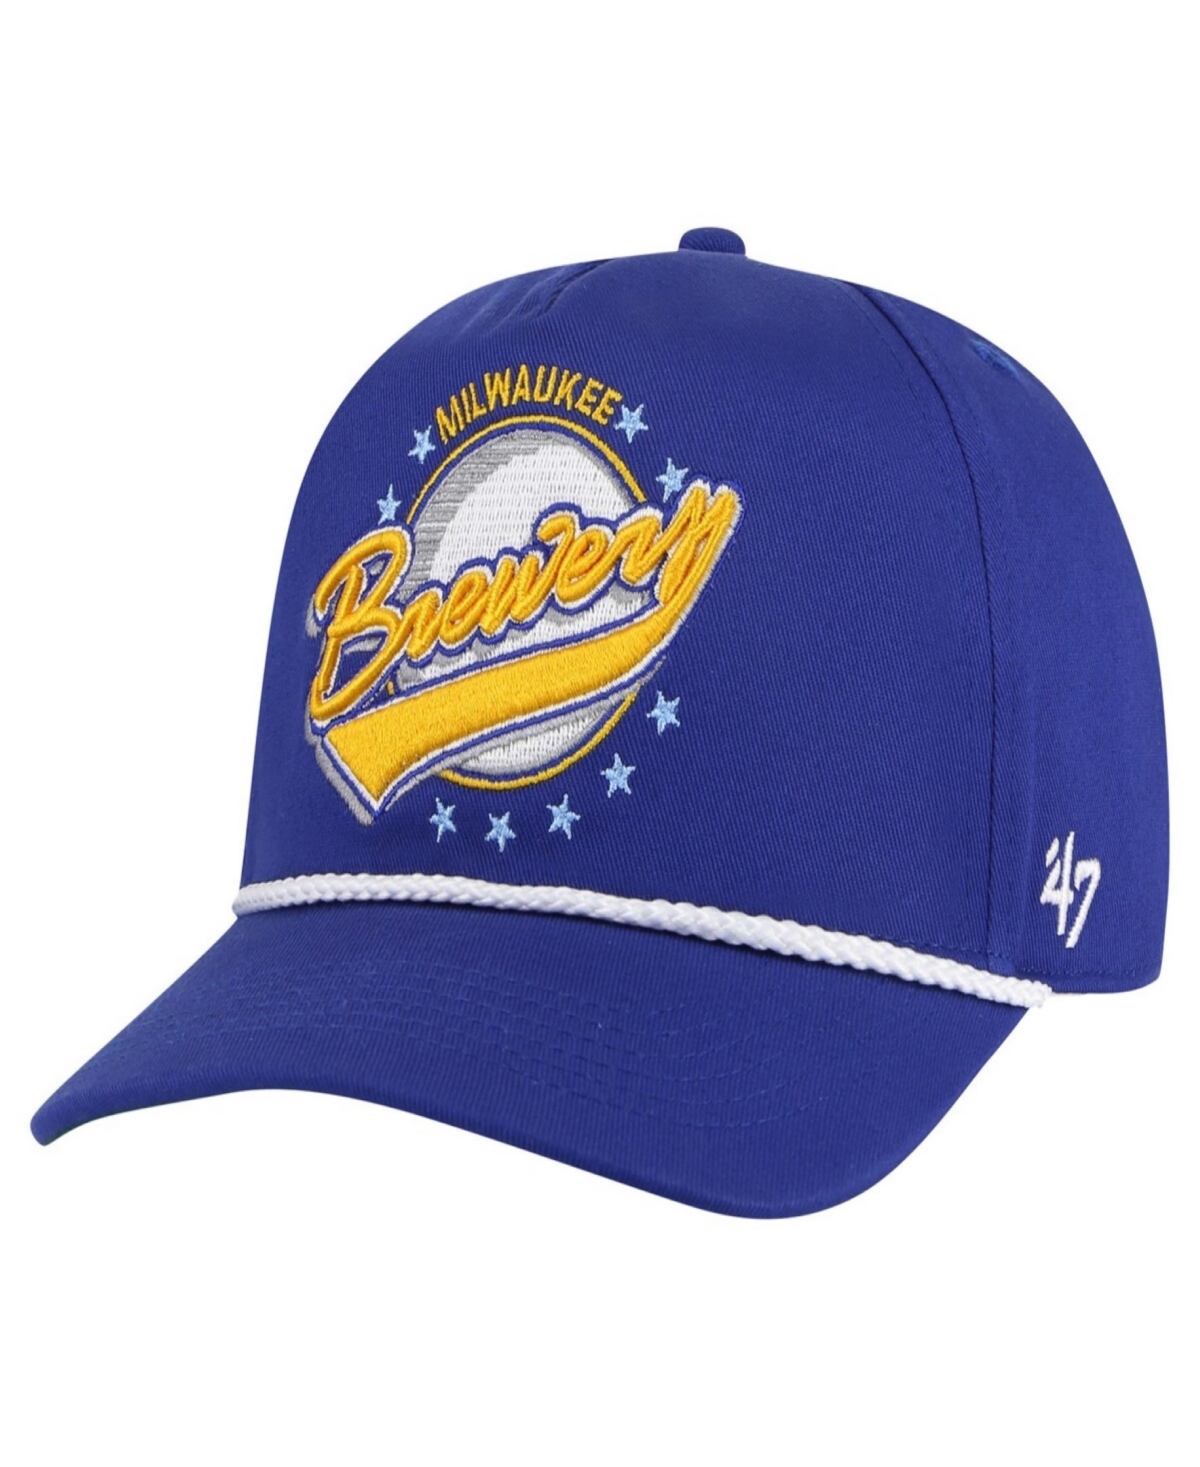 47 Brand Men's Royal Milwaukee Brewers Wax Pack Collection Premier Hitch Adjustable Hat - Royal